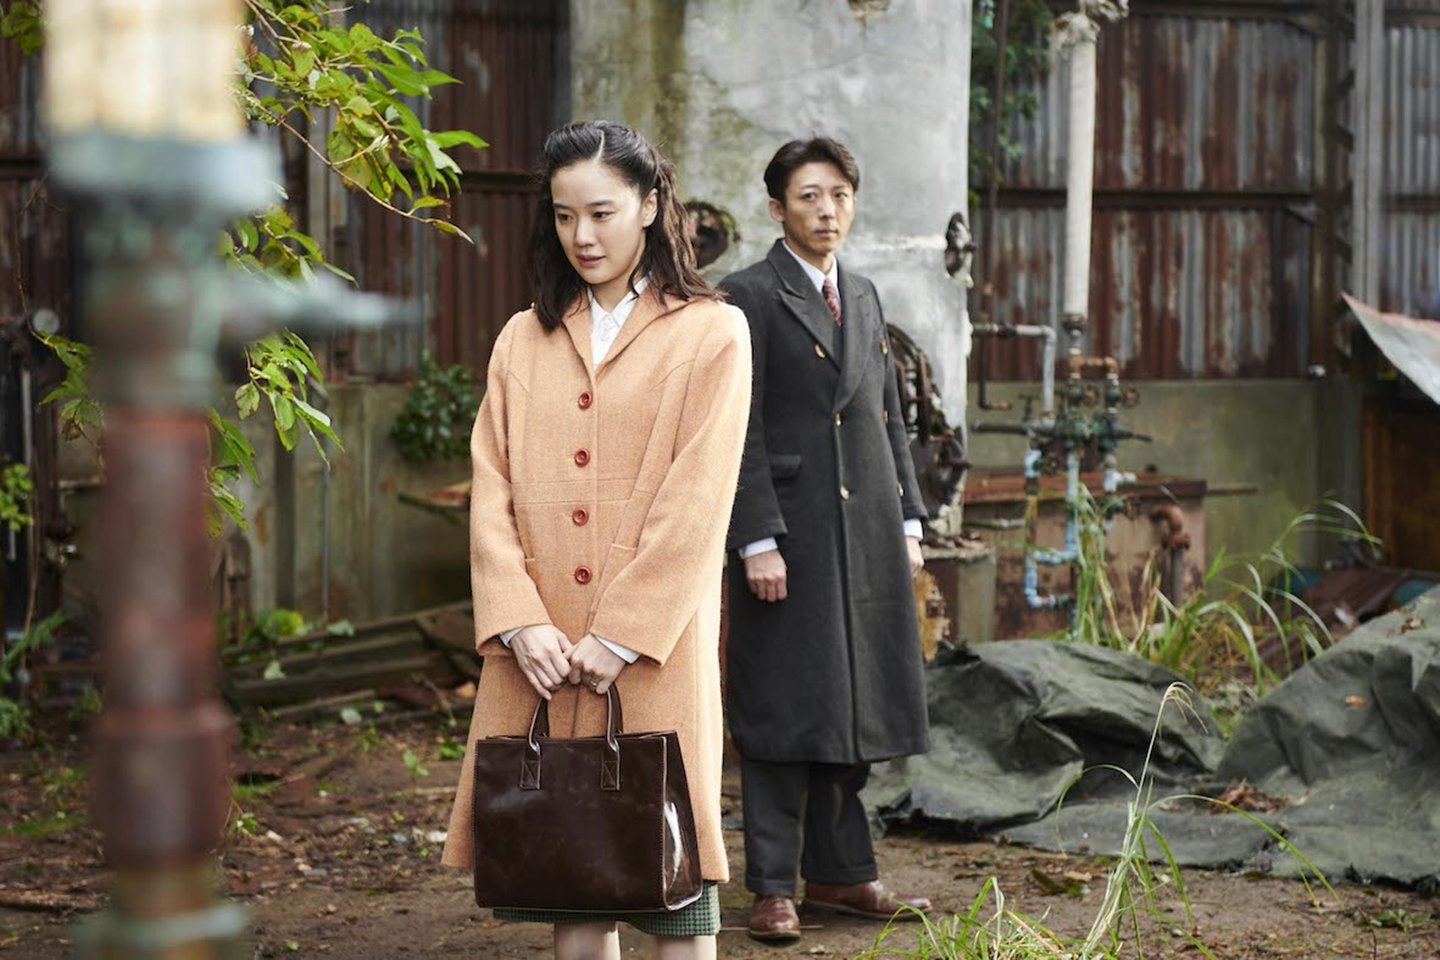 Wife of a Spy (2020) Review – A Really Quiet Drama